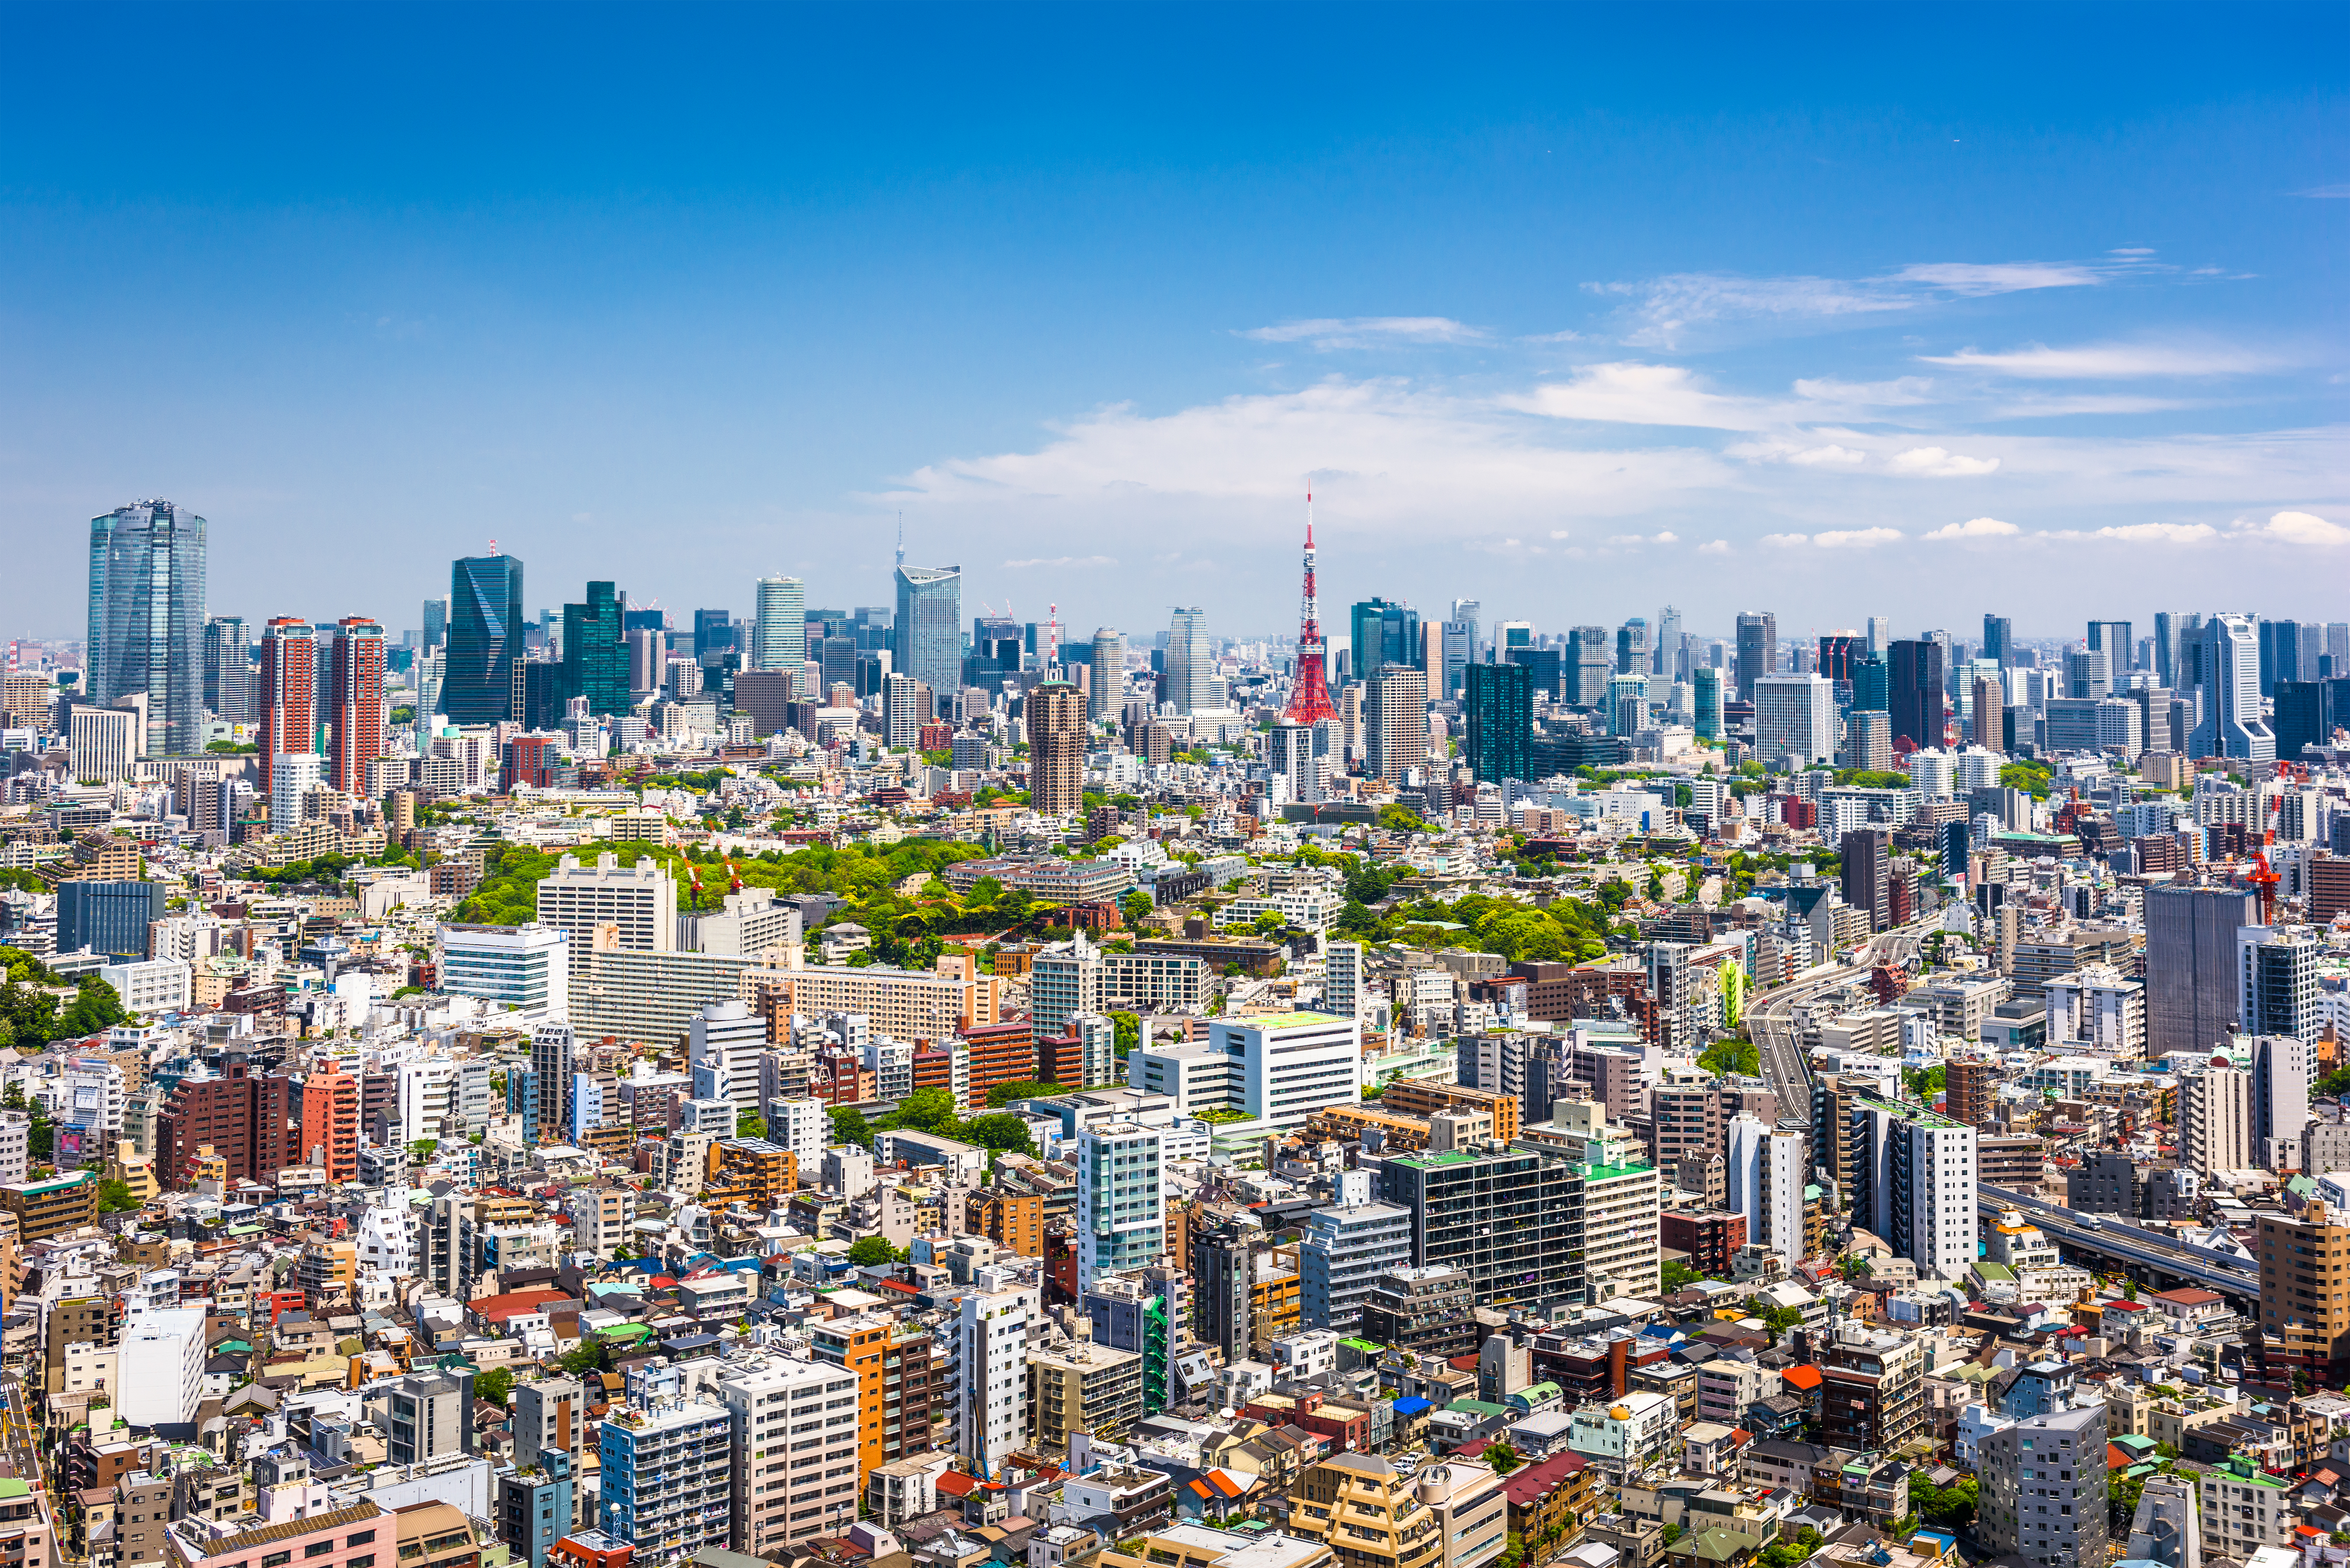 Software giant SAP launches the first SAP.iO Tokyo cohort to accelerate B2B Japanese tech startups